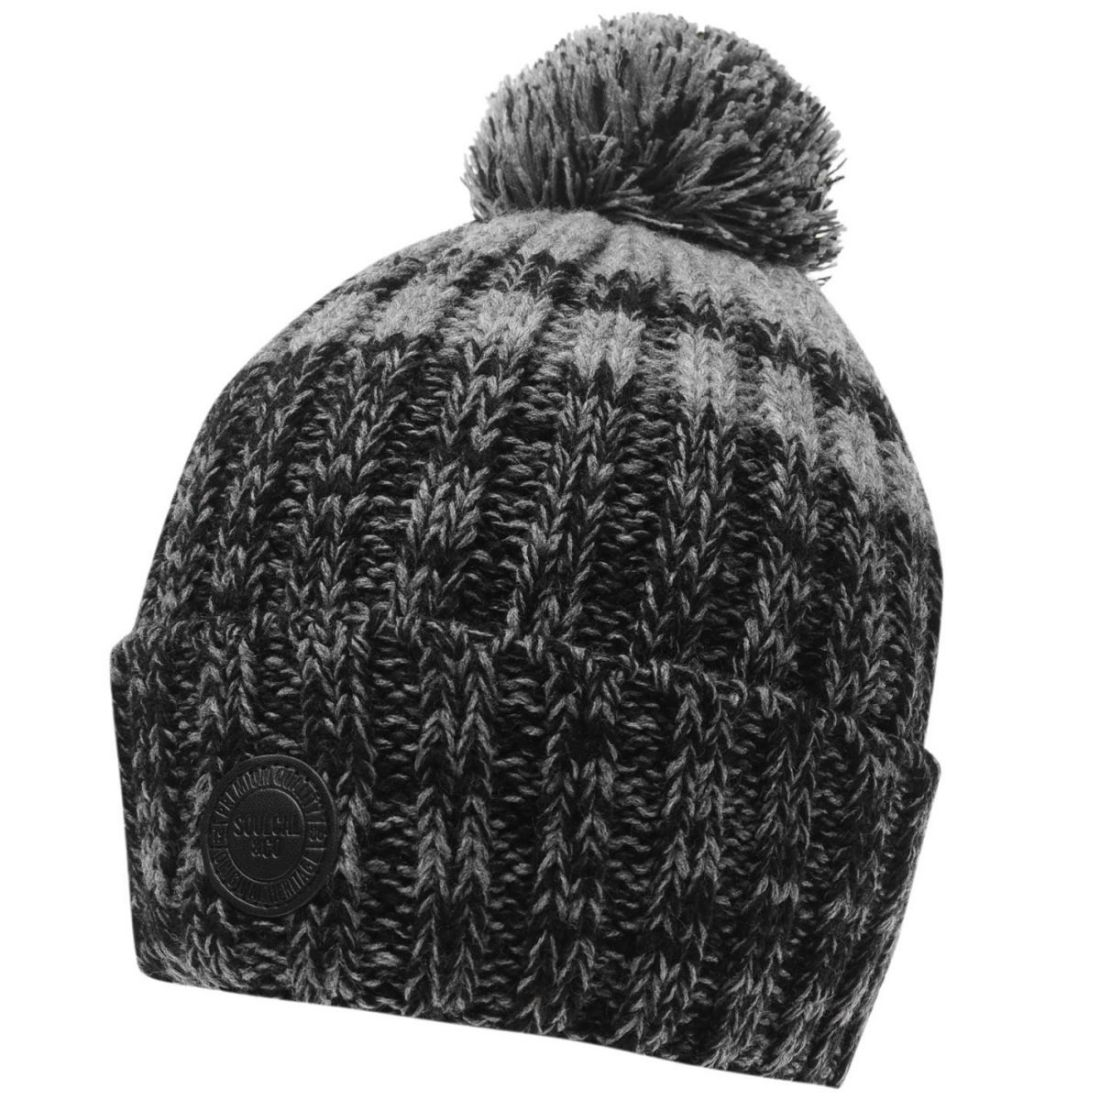 Knitted Mens Hat Patterns Details About Soulcal Mens Alutu Hat Bobble Pattern Knitted